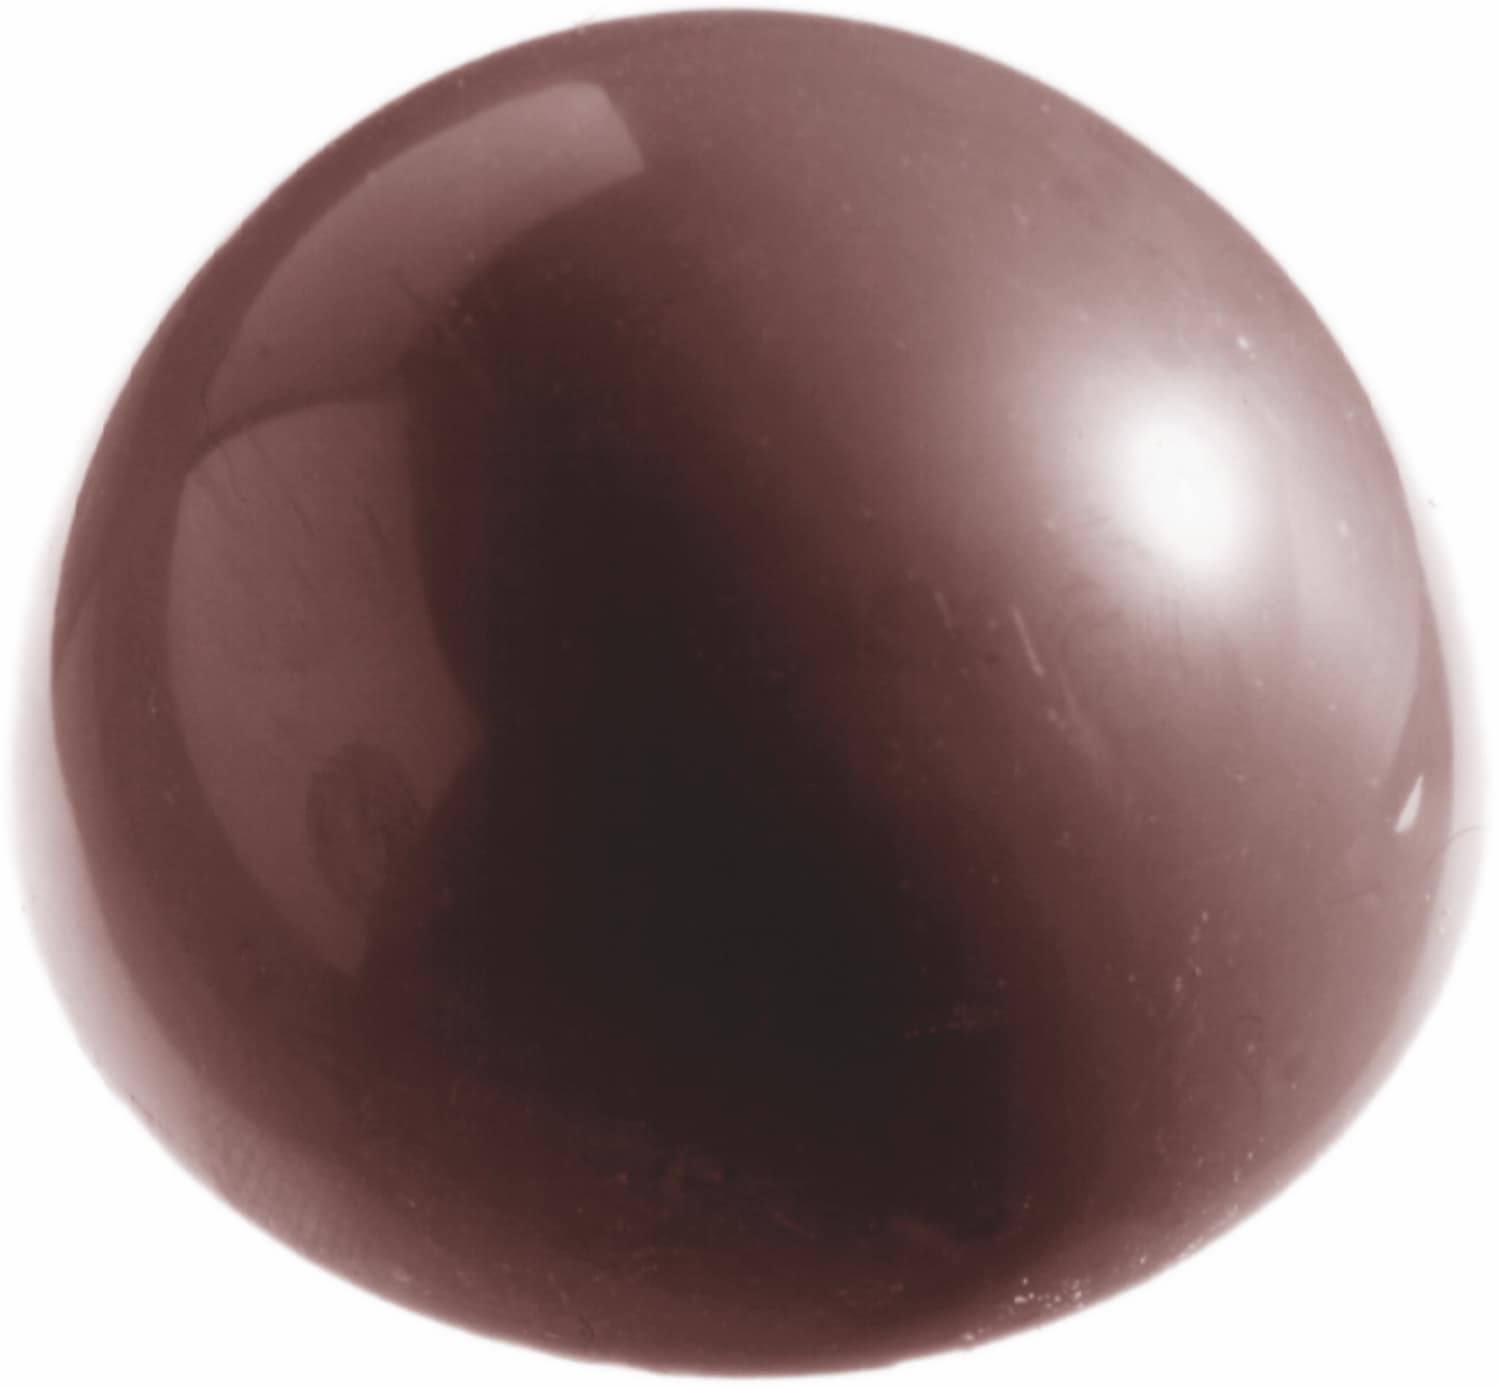 Chocolate mould "Sphere" v